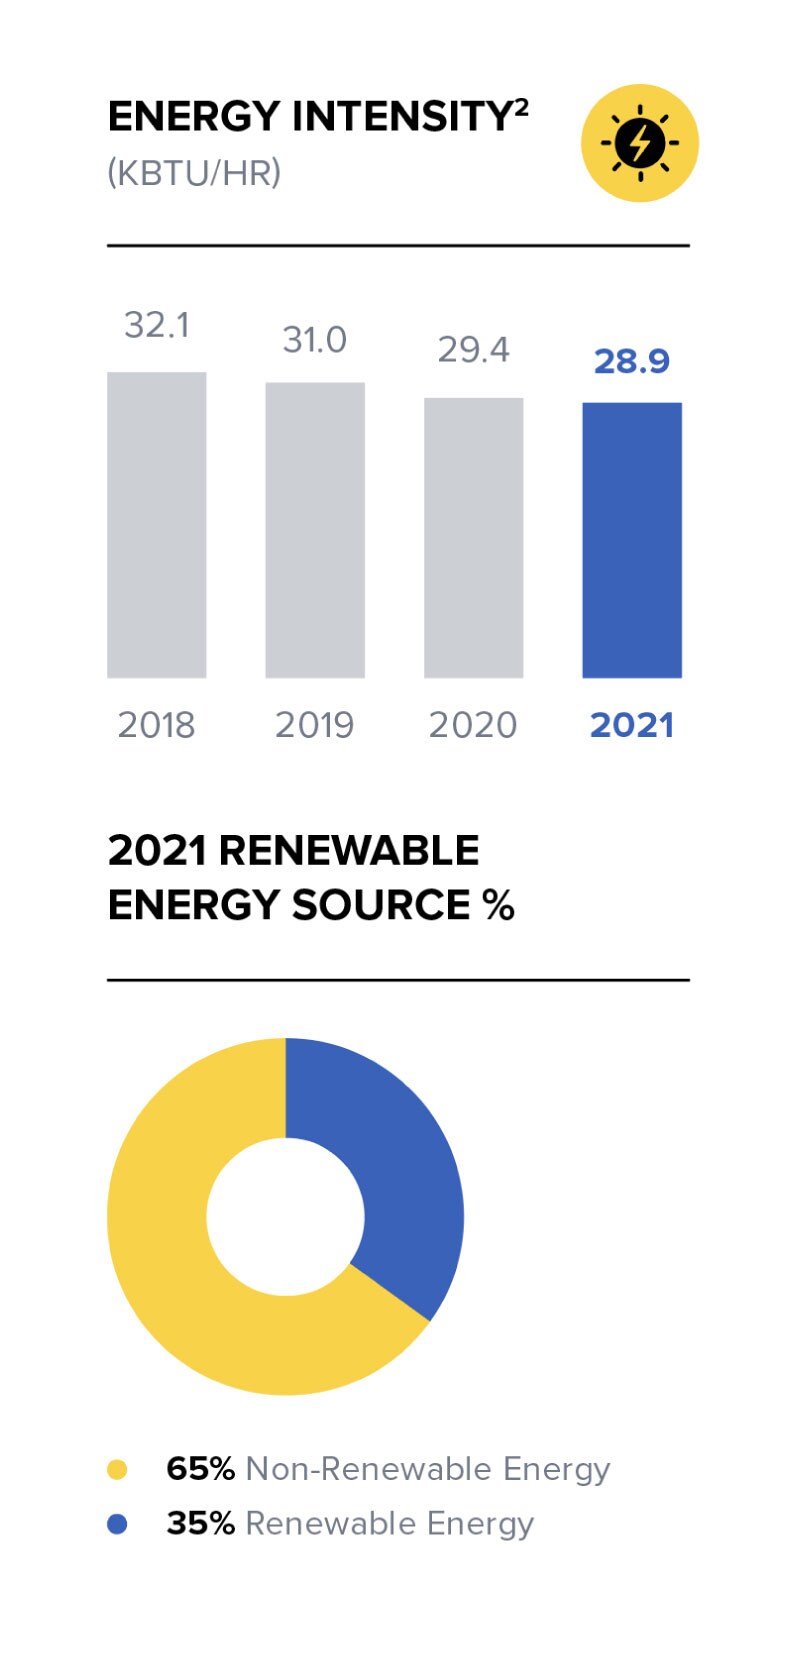 Graph of energy intensity and 2021 renewable energy source percentage